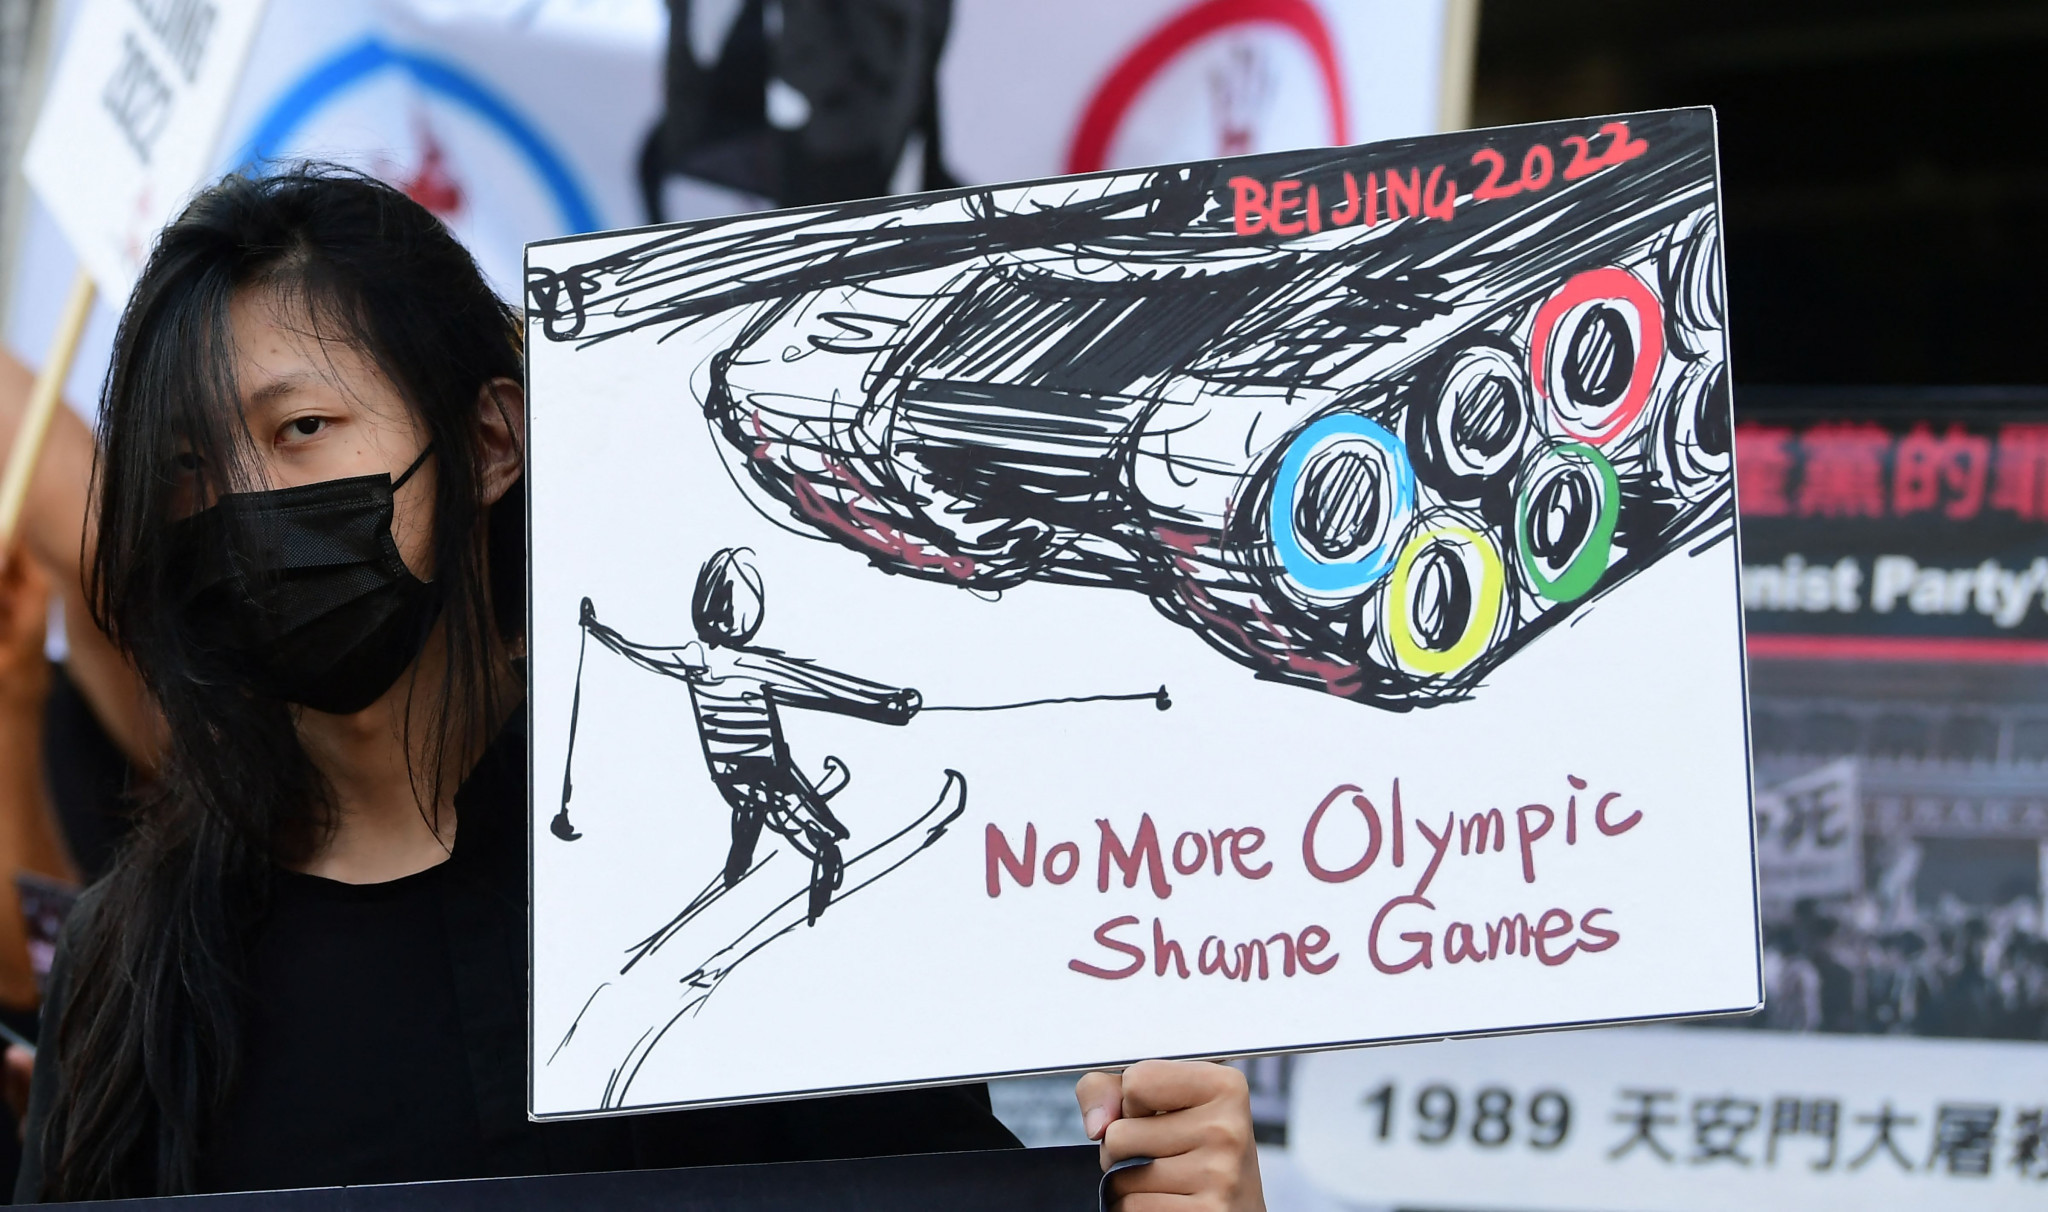 The Peng Shuai case has added to campaigners' calls for China to be stripped of the Winter Olympics on human rights grounds ©Getty Images